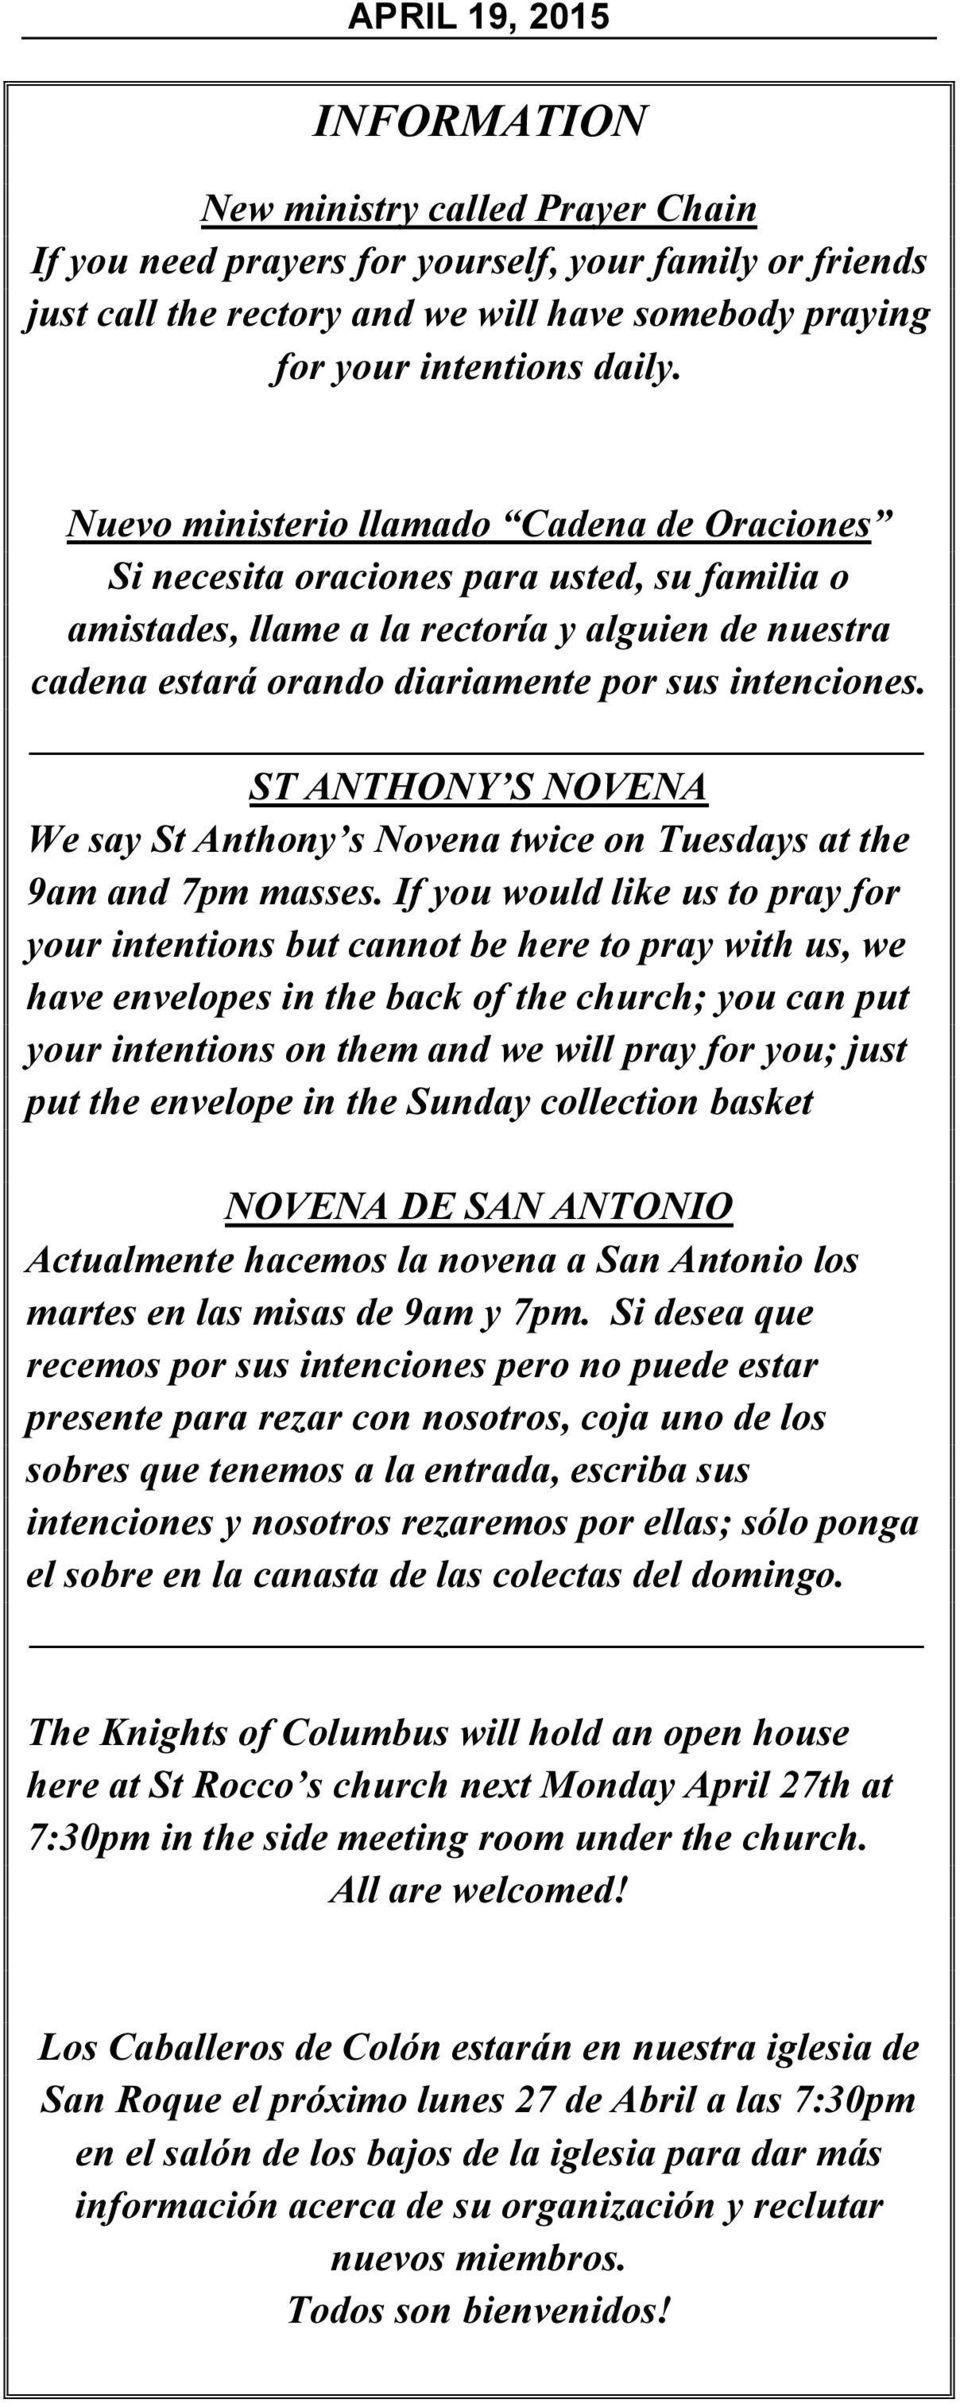 ST ANTHONY S NOVENA We say St Anthony s Novena twice on Tuesdays at the 9am and 7pm masses.